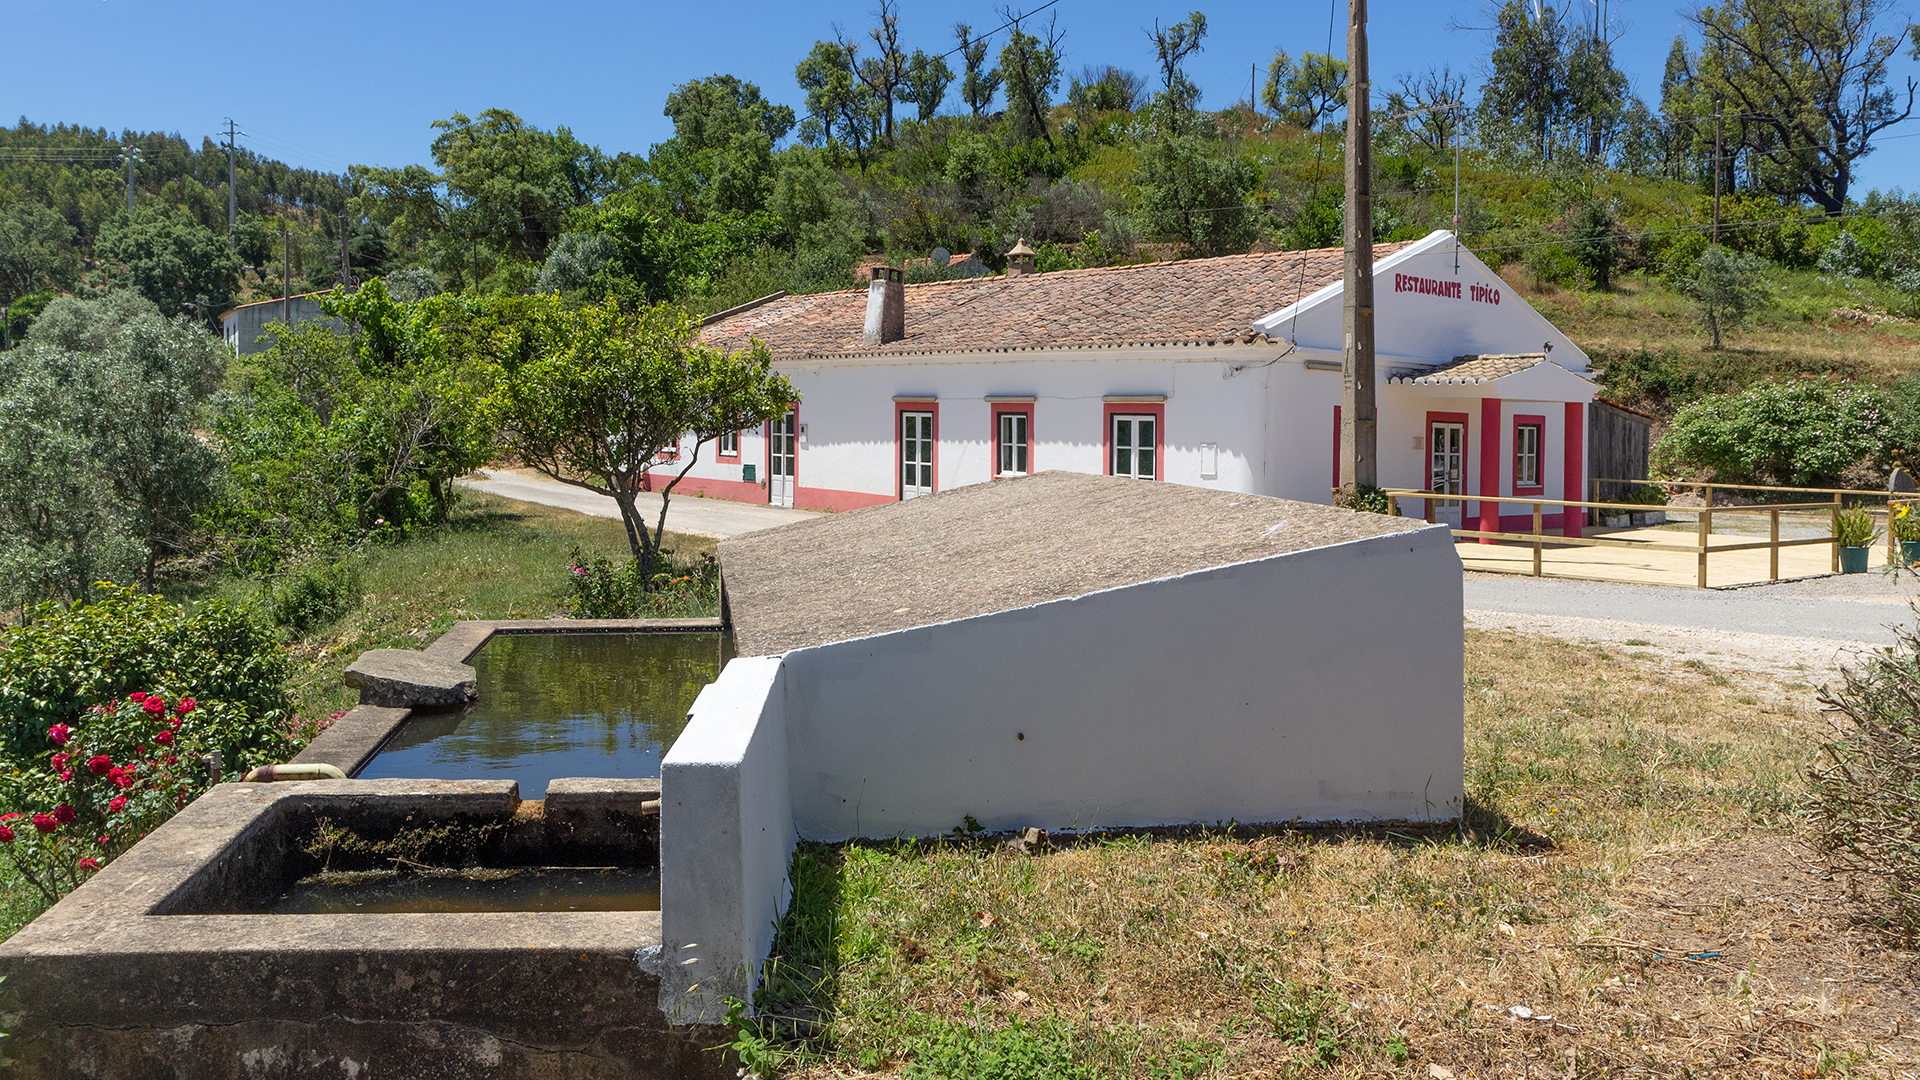 Opportunity - Restaurant, Cottage and Land near Monchique, West Algarve | LG1869 Perfect opportunity to take over a successful, small business or to create a restaurant serving produce from the land whilst converting the cottage for your own home or possibly a guest rental accommodation. 